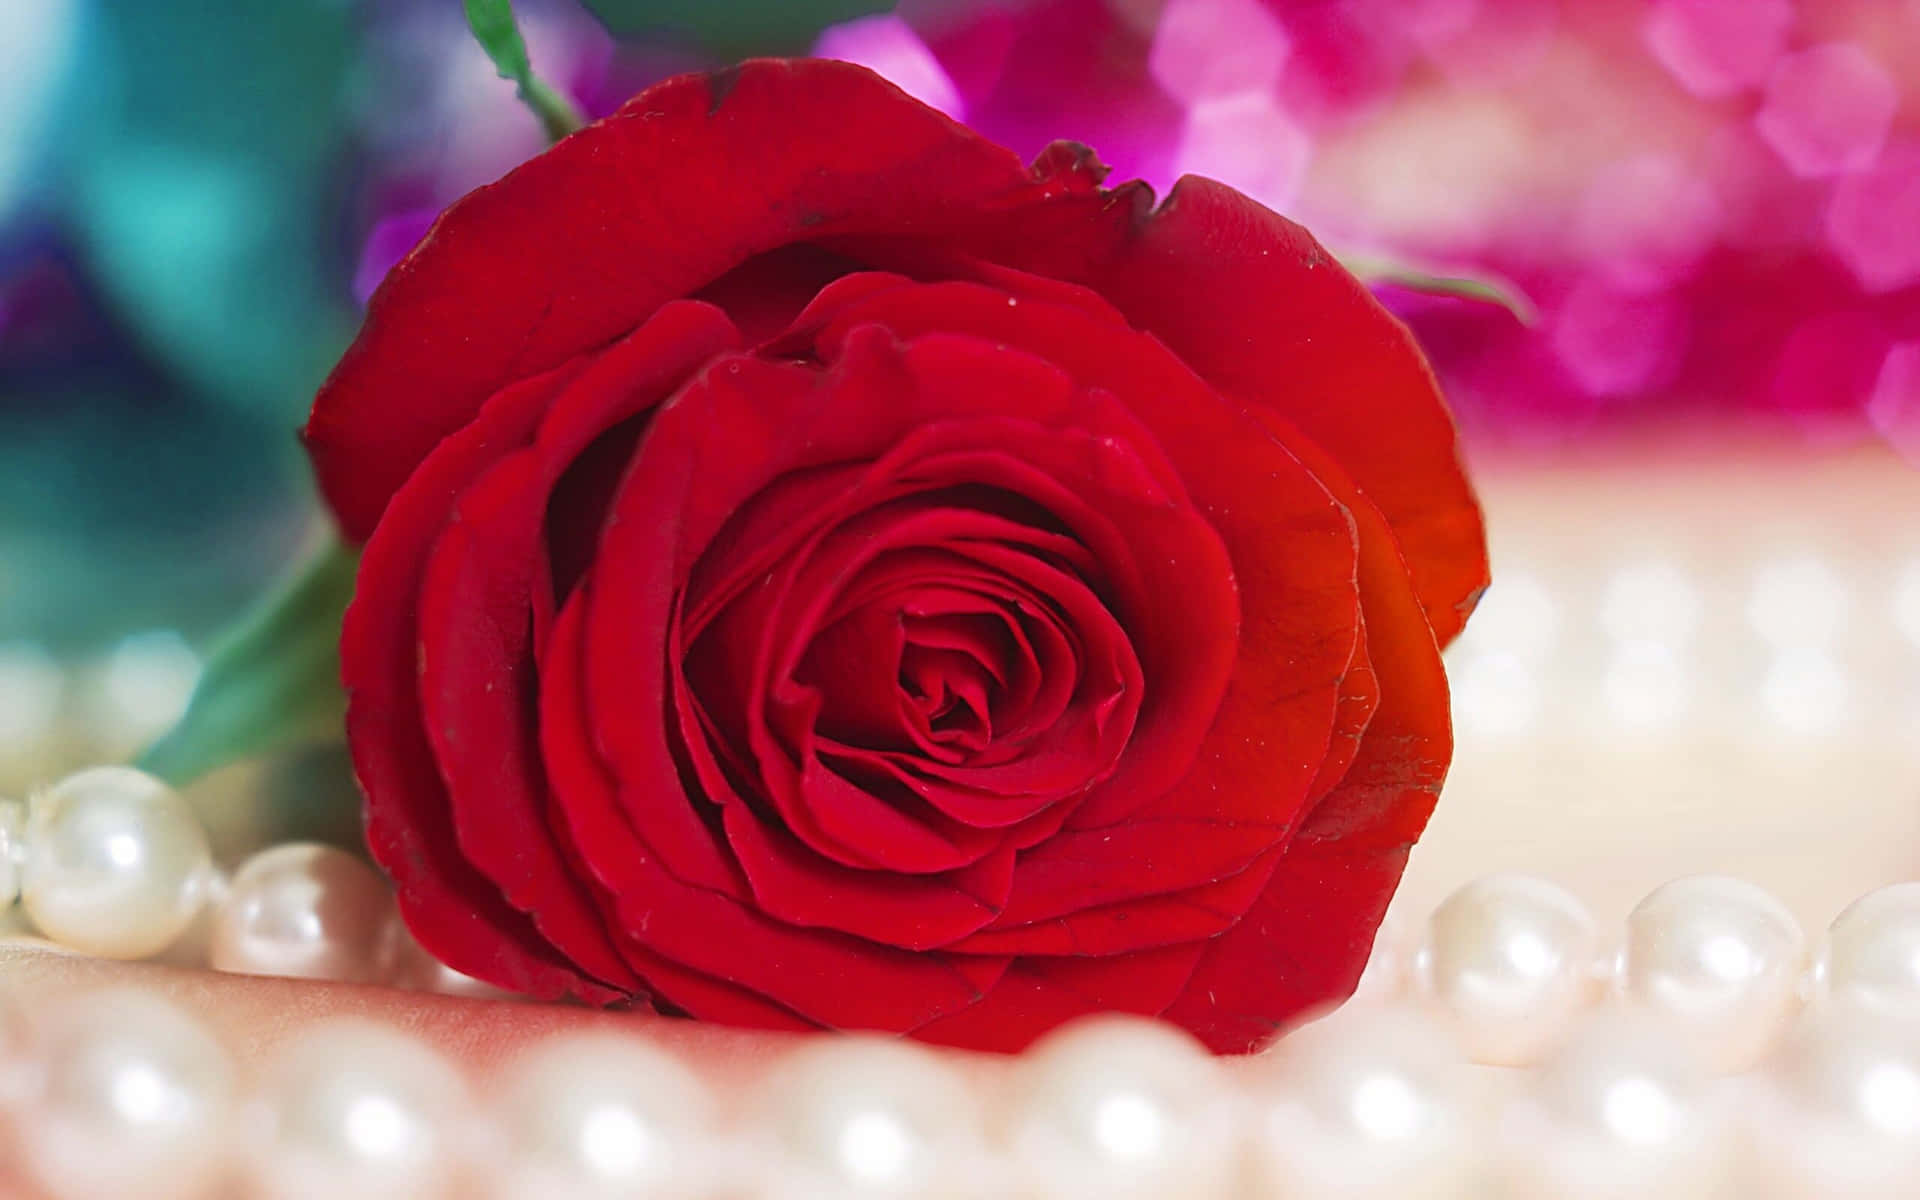 Enjoy Valentine's Day with these Beautiful Roses Wallpaper